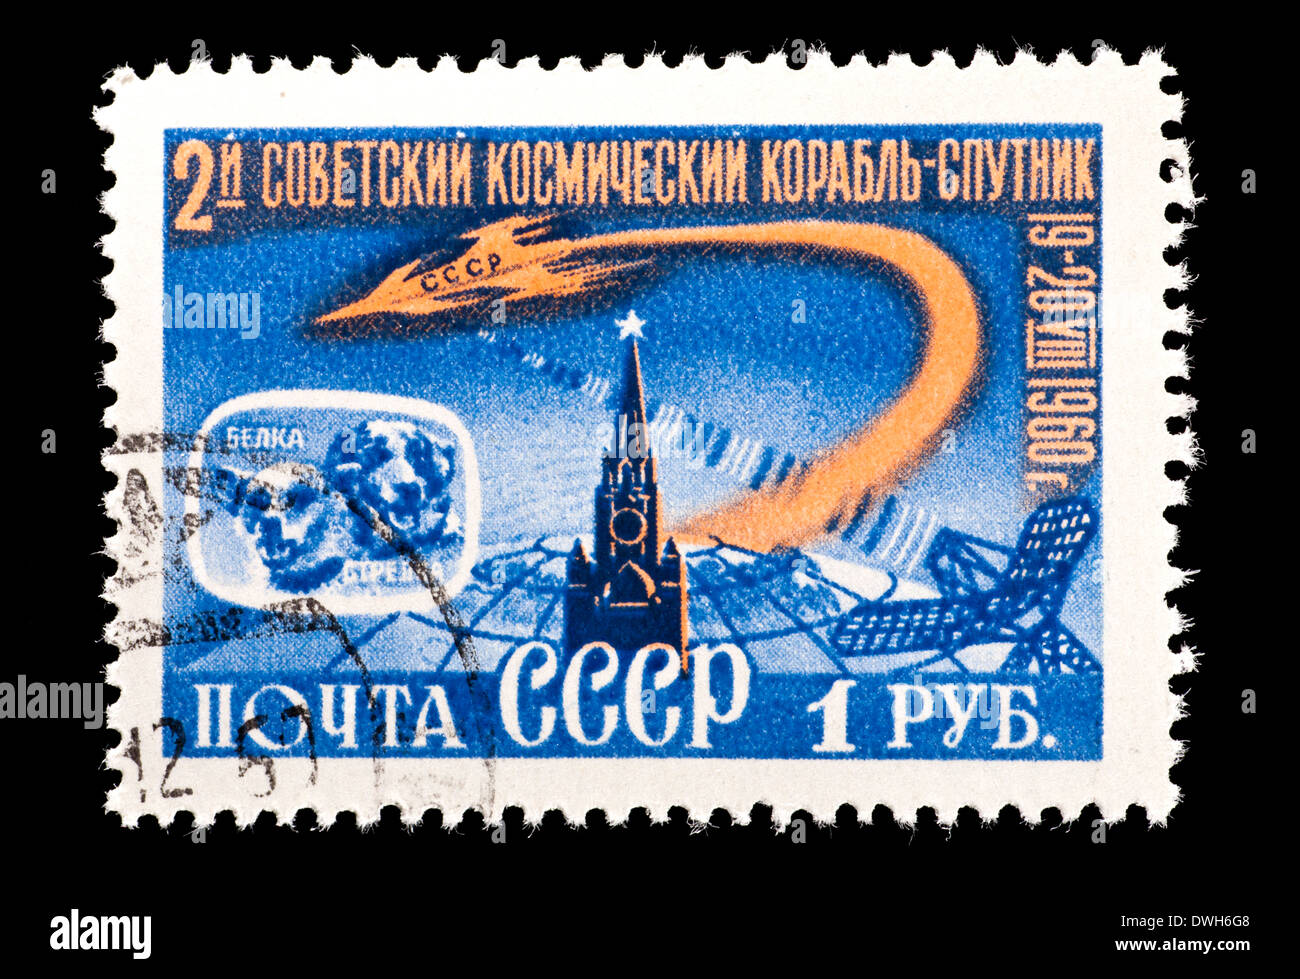 Postage stamp from the Soviet Union (USSR) depicting the Kremlin, Sputnik 5 and the dogs Belka and Strelka. Stock Photo